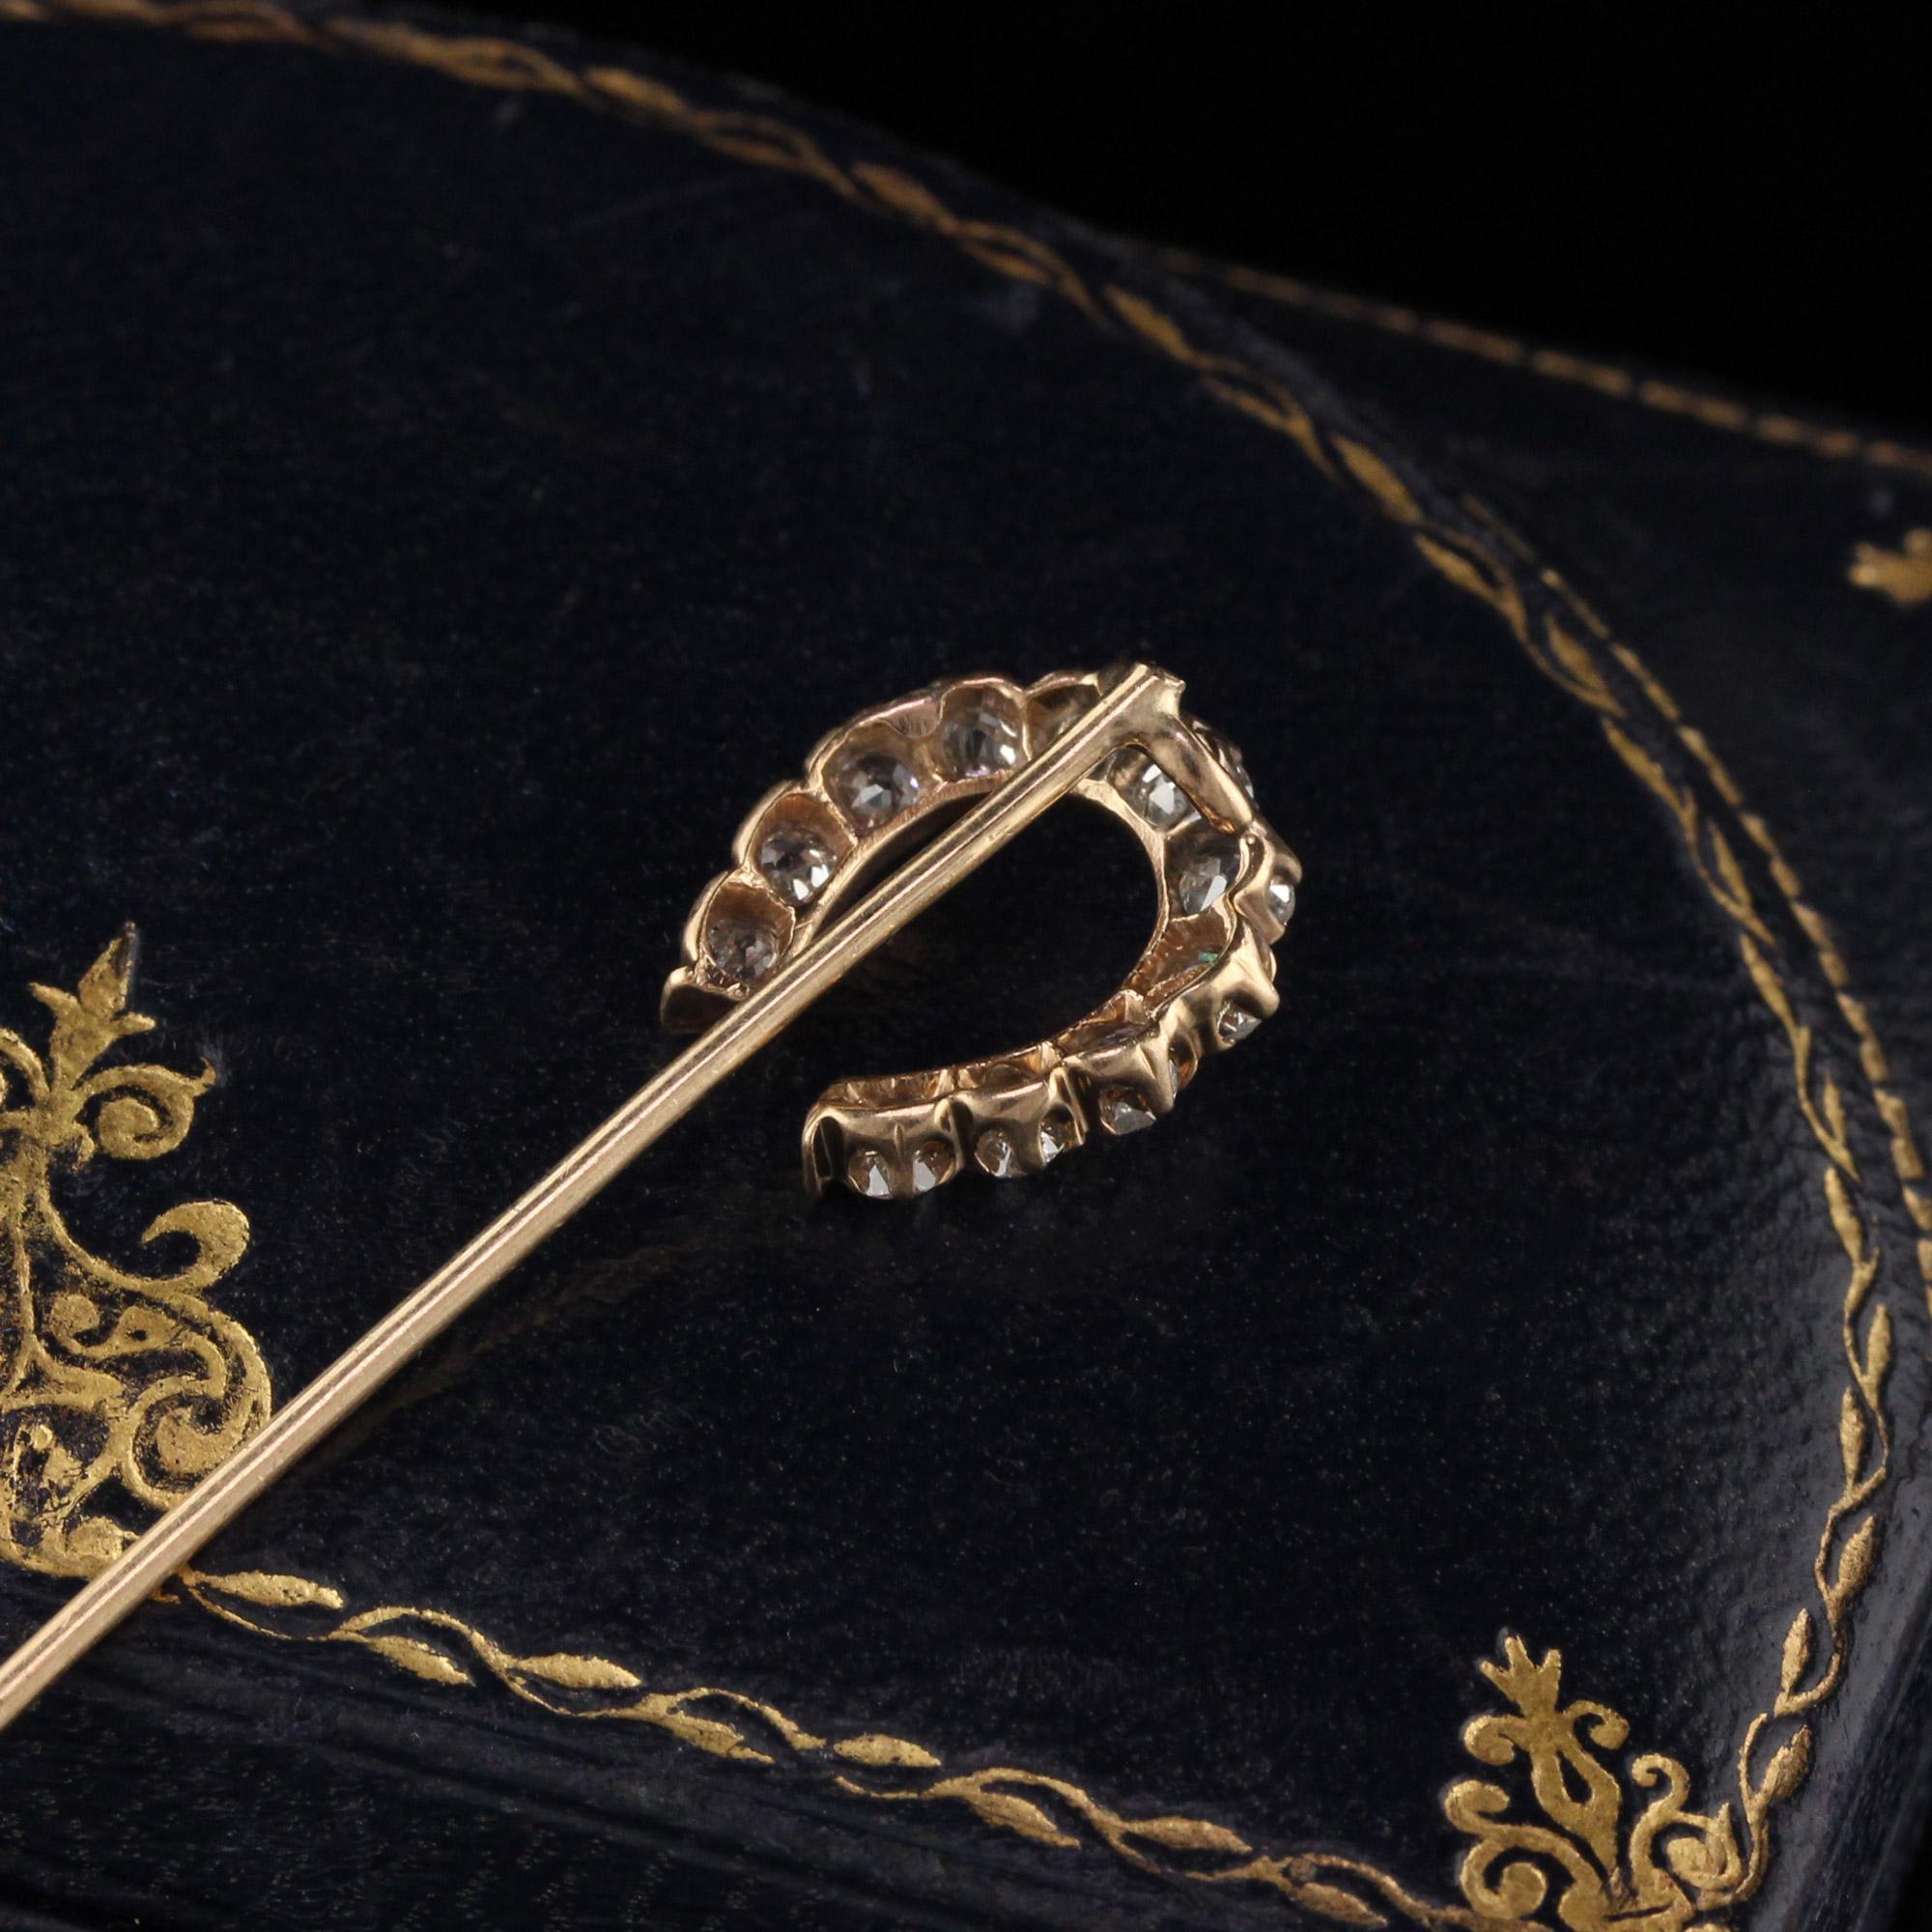 Stunning Victorian horse shoe pin with Old mine cut diamonds. 

Item #P0094

Metal: 14K Yellow Gold

Weight: 1.8 Grams

Total Diamond Weight: Approximately 0.85 cts

Diamond Color: H

Diamond Clarity: SI1

Measurements: 2.6 in x 5.9 mm